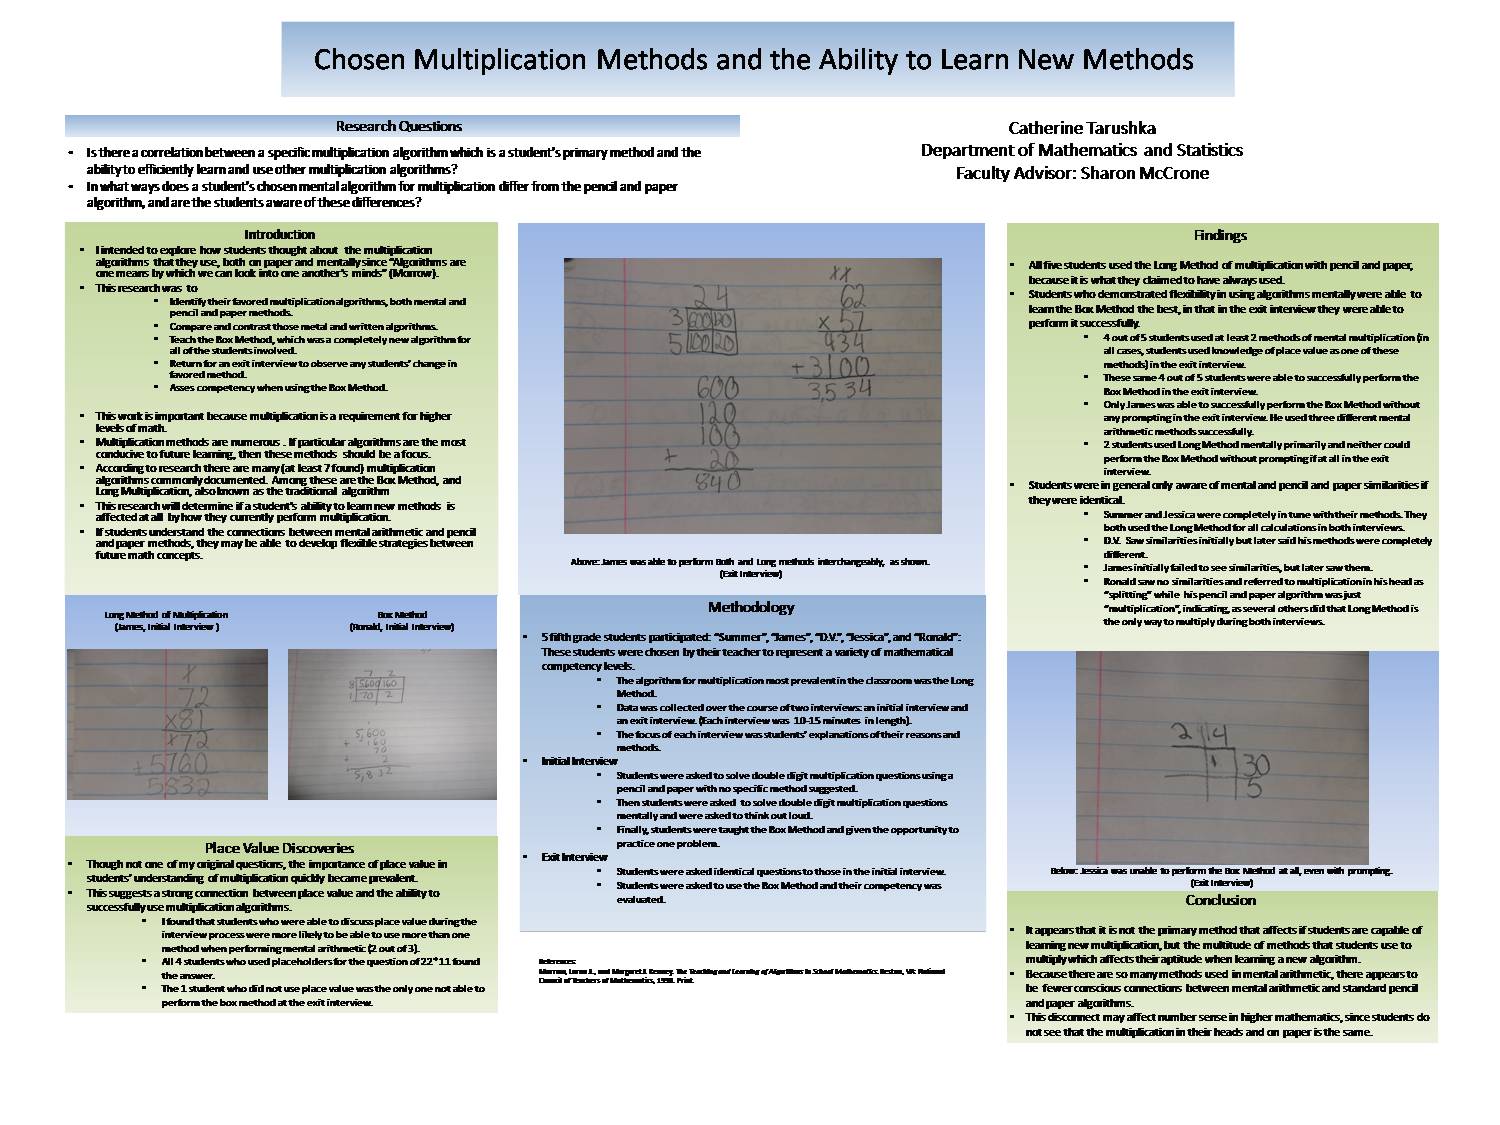 Chosen Multiplication Methods And The Ability To Learn New Methods by cas89